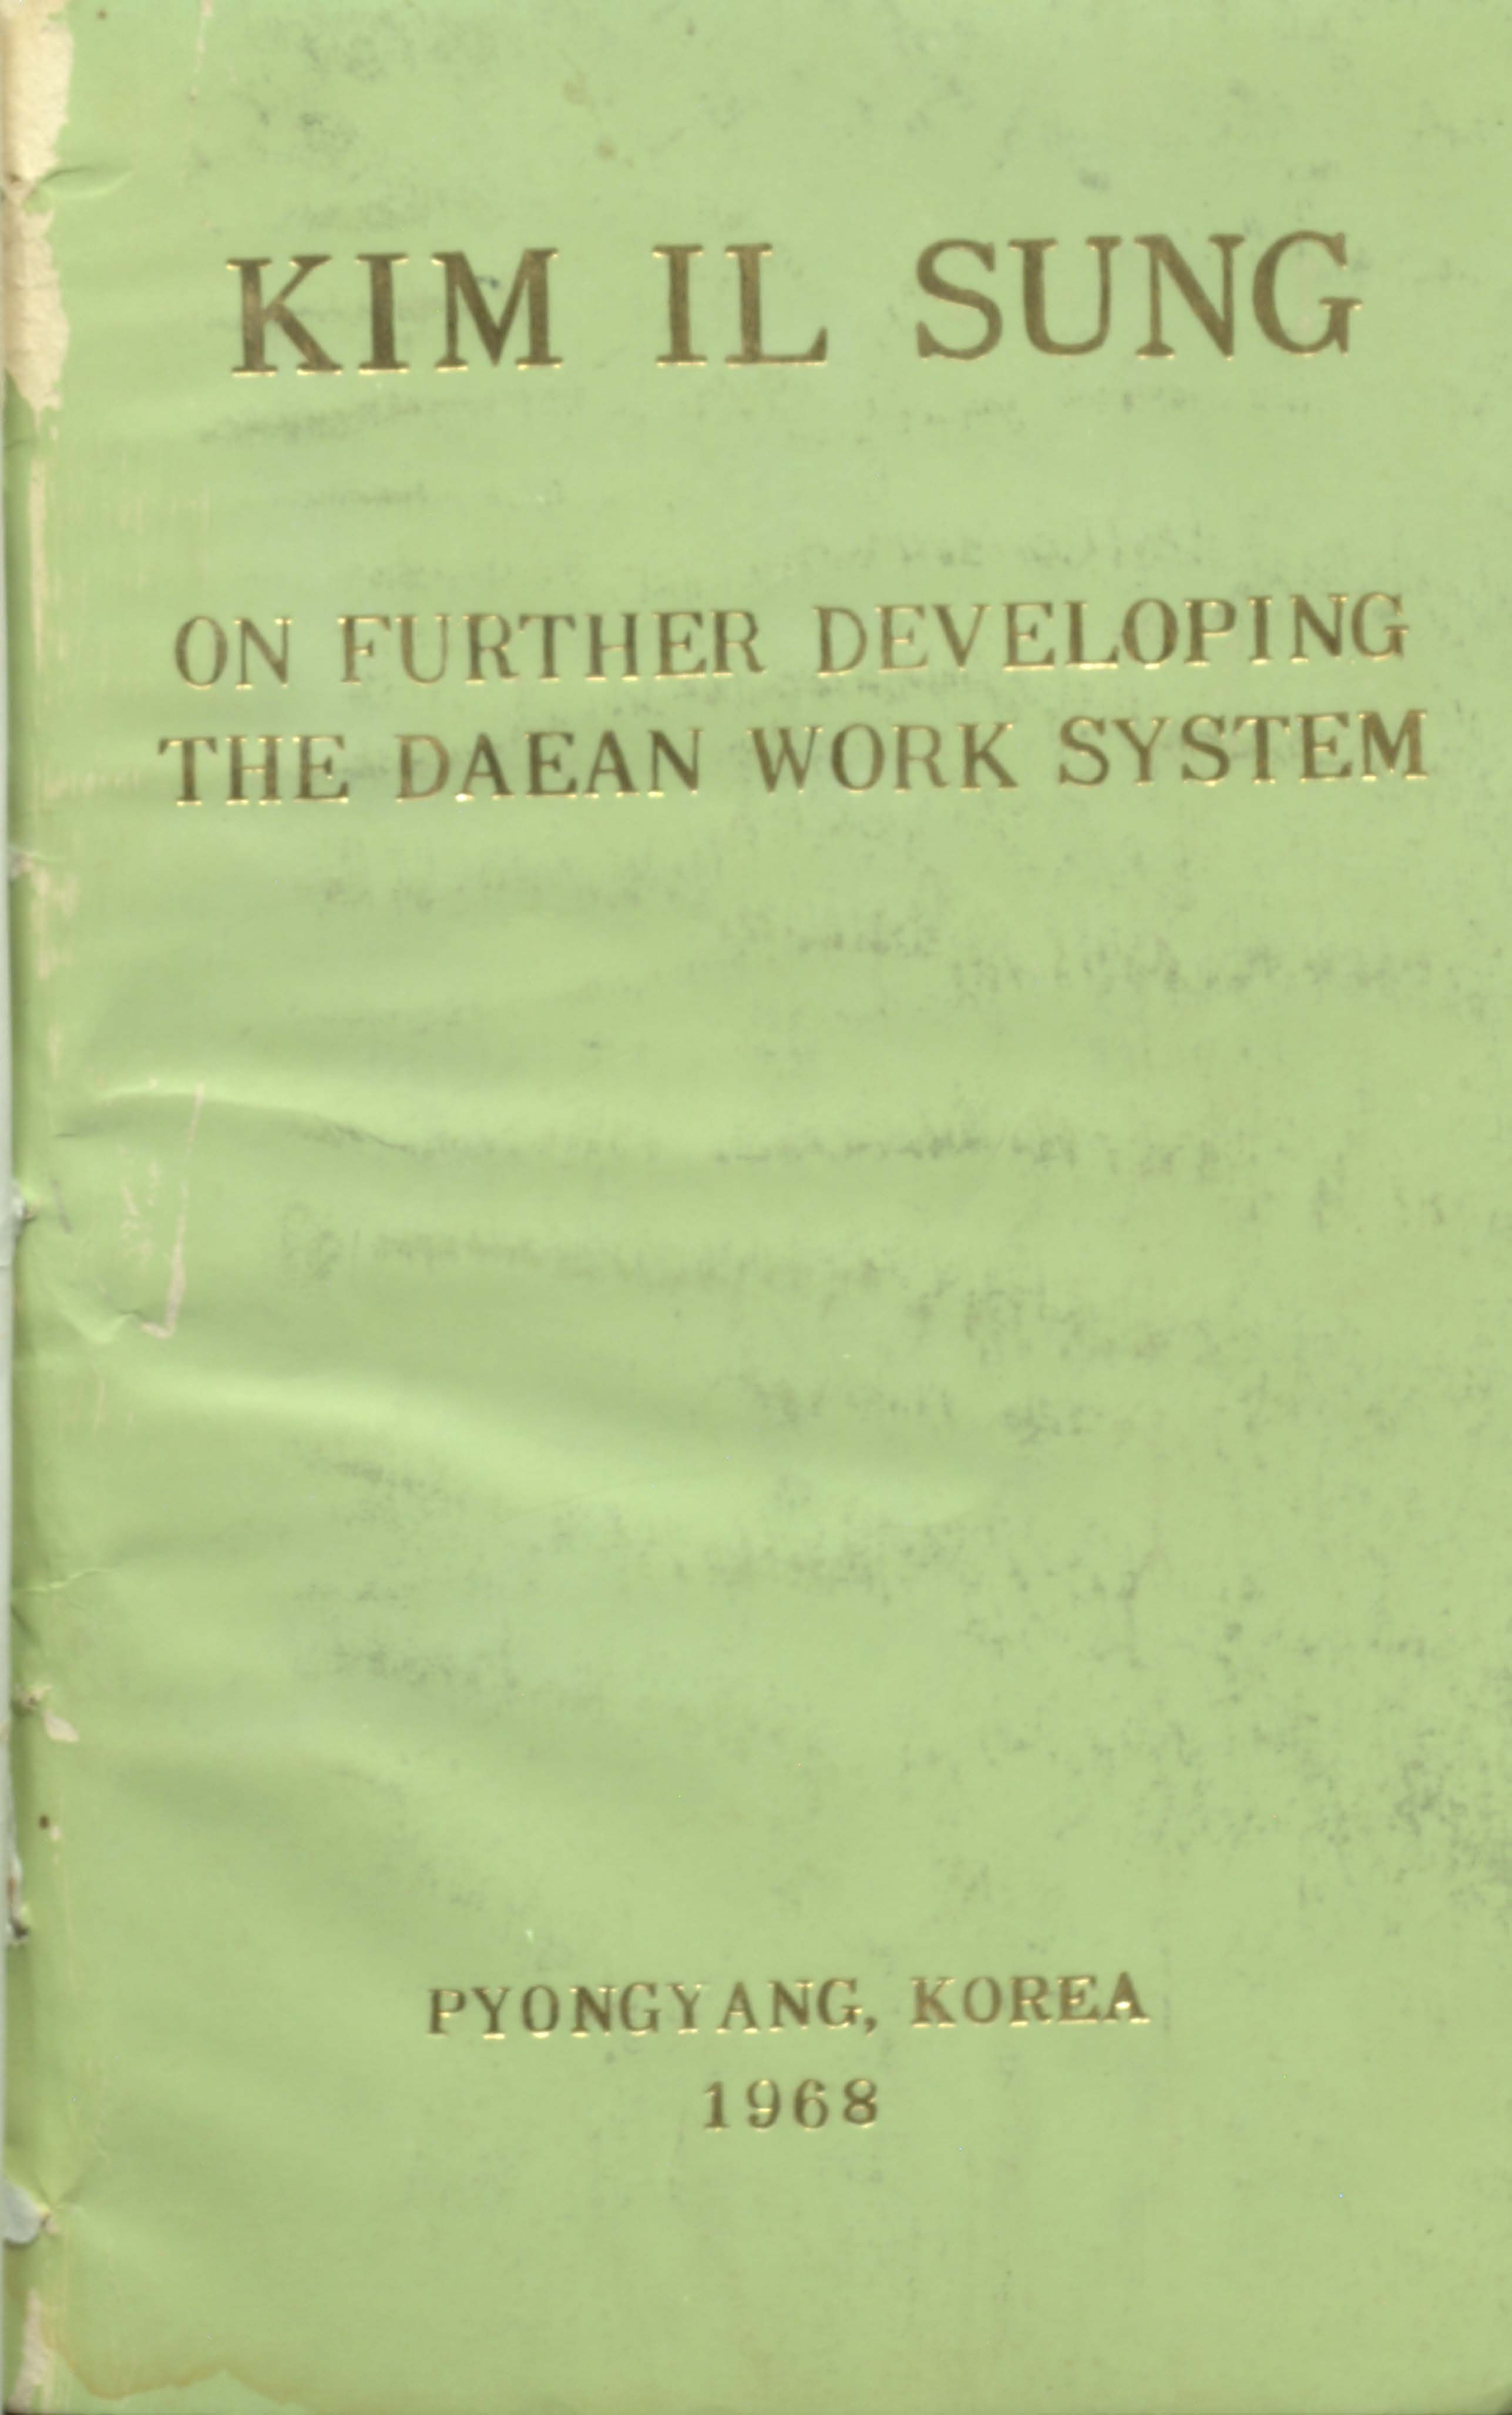 KIM IL SUNG  On further developing th daean work system